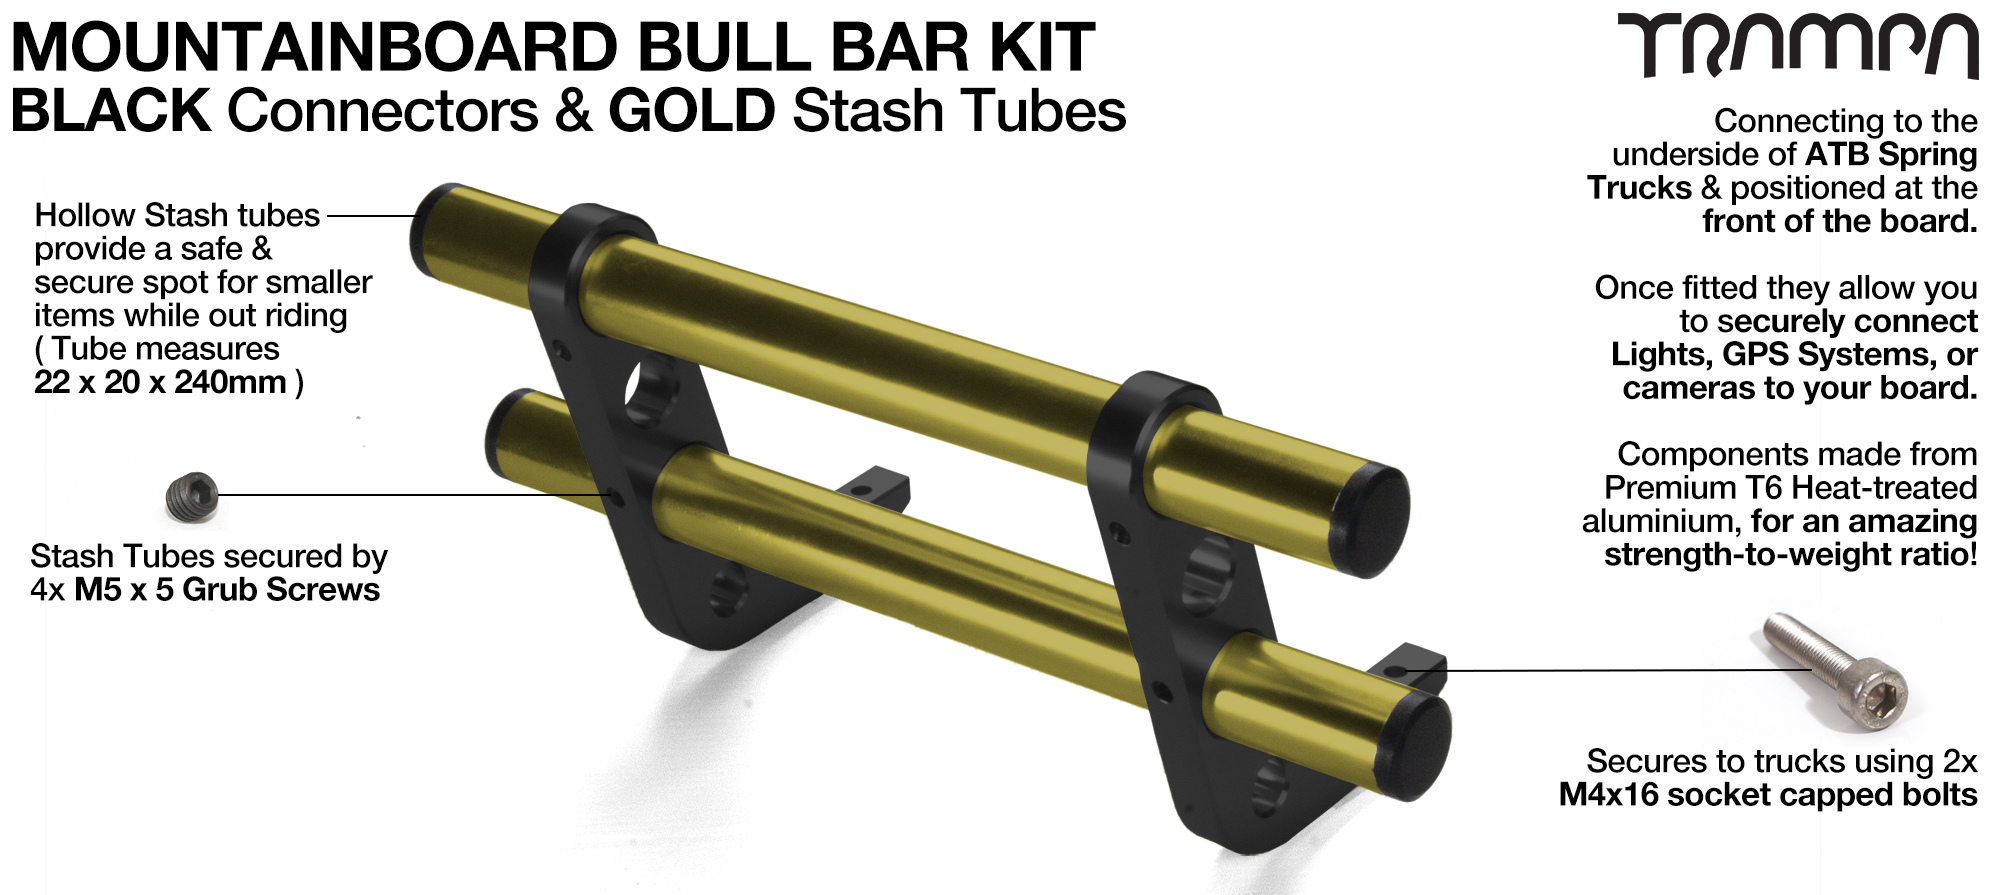 BLACK Uprights & GOLD Crossbar BULL BARS for MOUNTAINBOARDS using T6 Heat Treated CNC'd AluminIum Clamps, Hollow Aluminium Stash Tubes with Rubber end bungs 